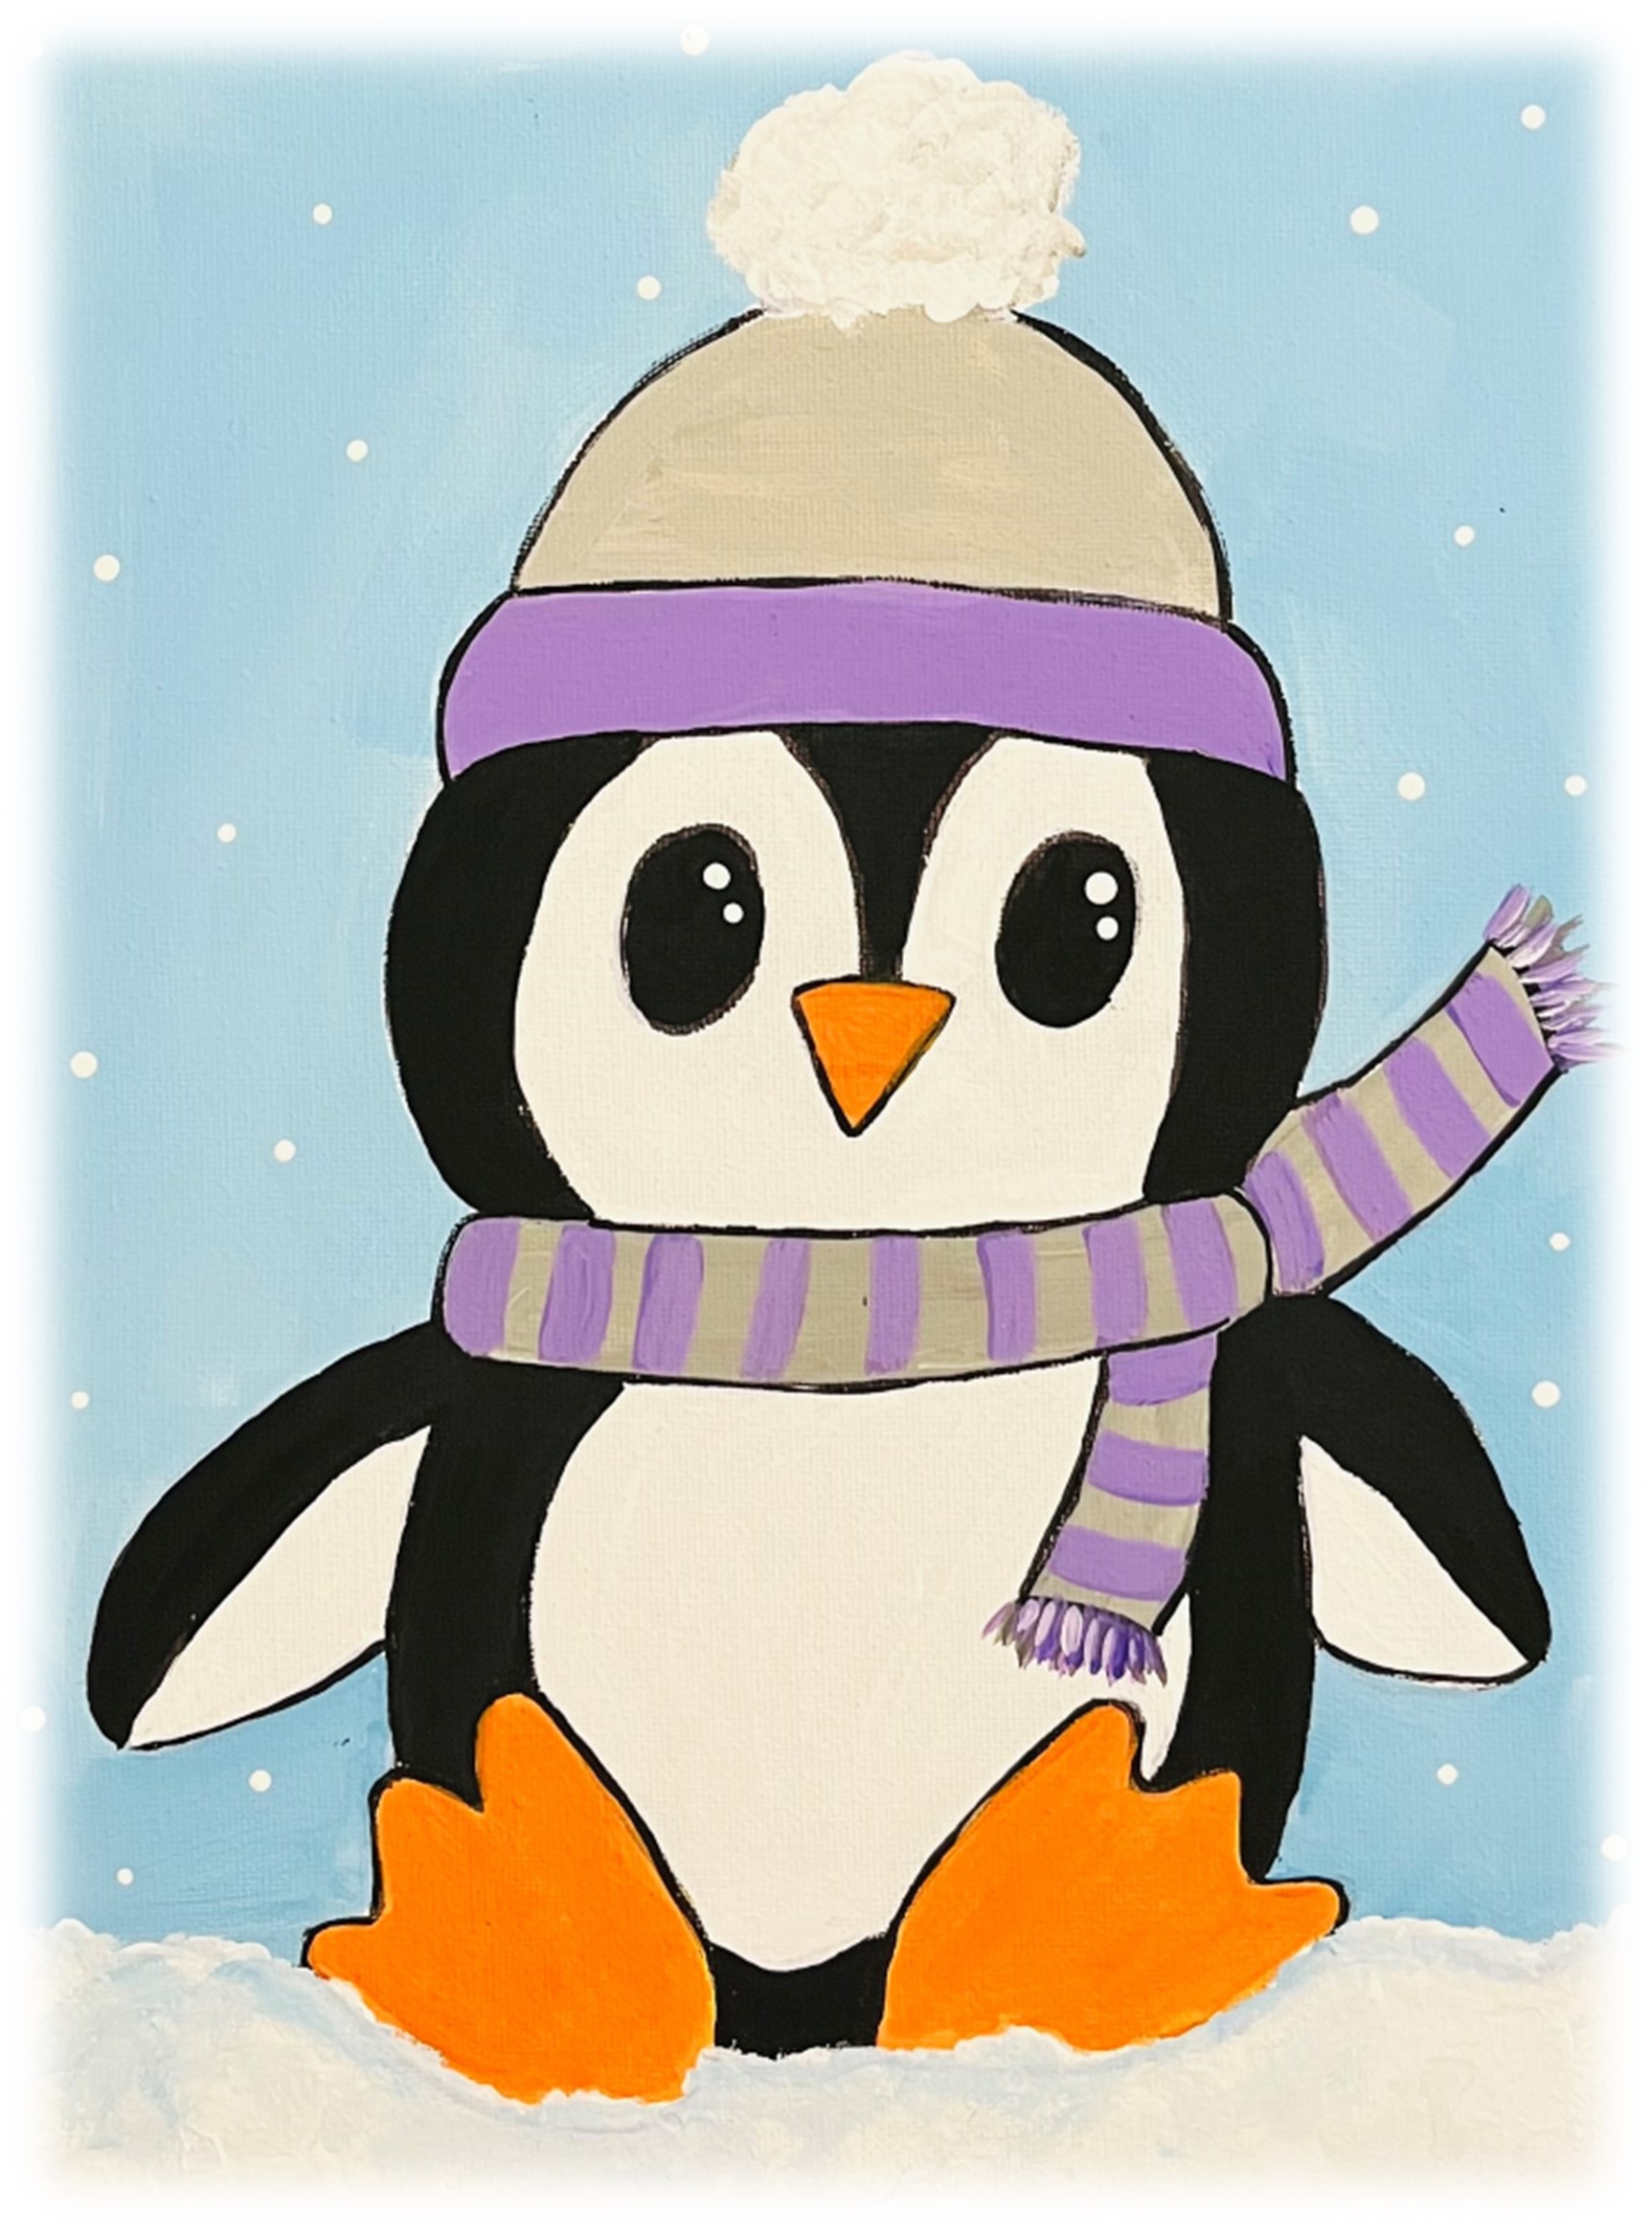 Canvas with penguin painted in acrylics. Wearing a grey and purple hat and scarf. Feet and beak are painted orange. 